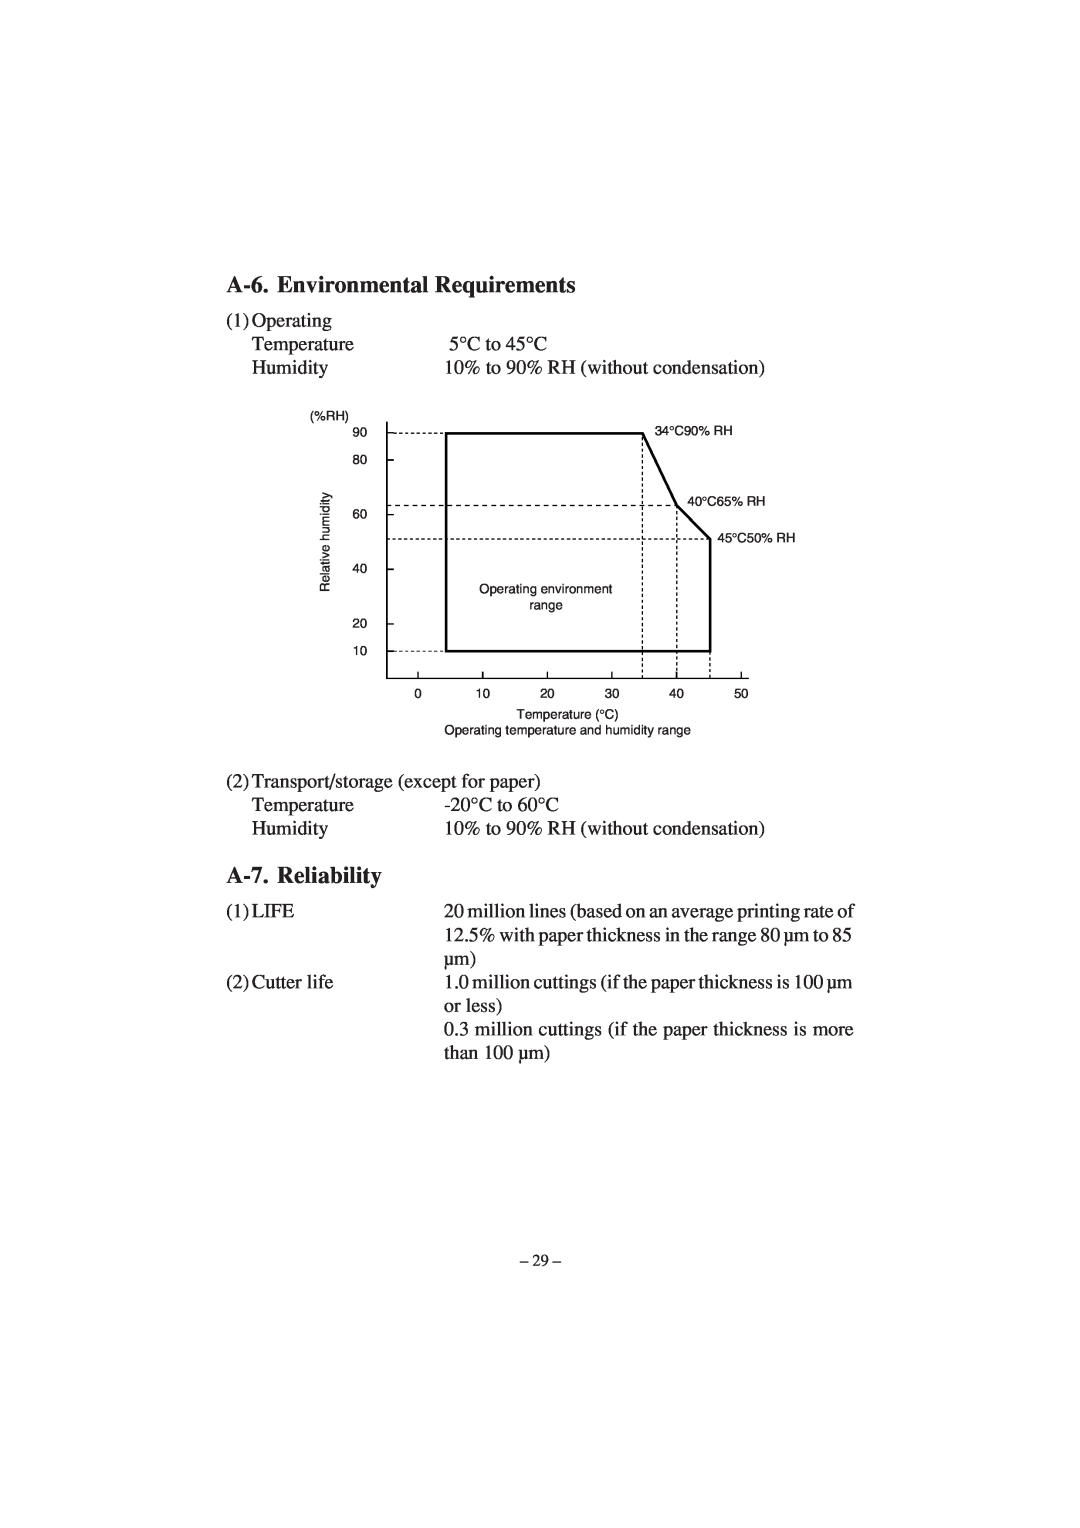 Star Micronics TSP1000 user manual A-6. Environmental Requirements, A-7. Reliability 